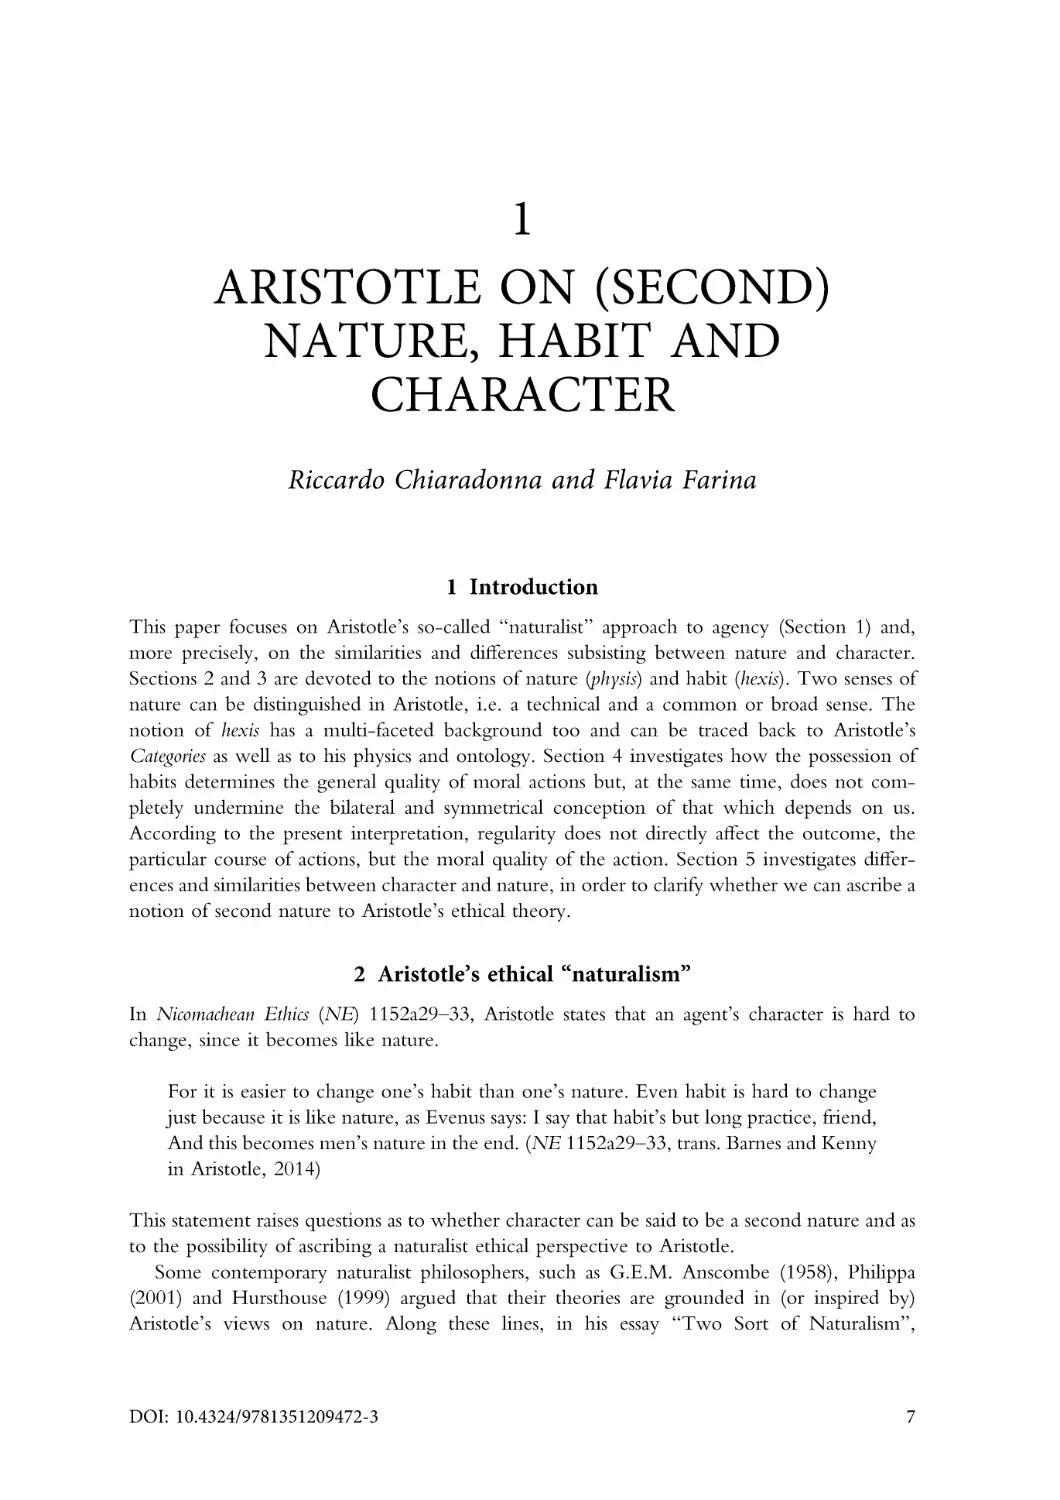 1. Aristotle on (second) nature, habit and character
1. Introduction
2. Aristotle's ethical "naturalism"